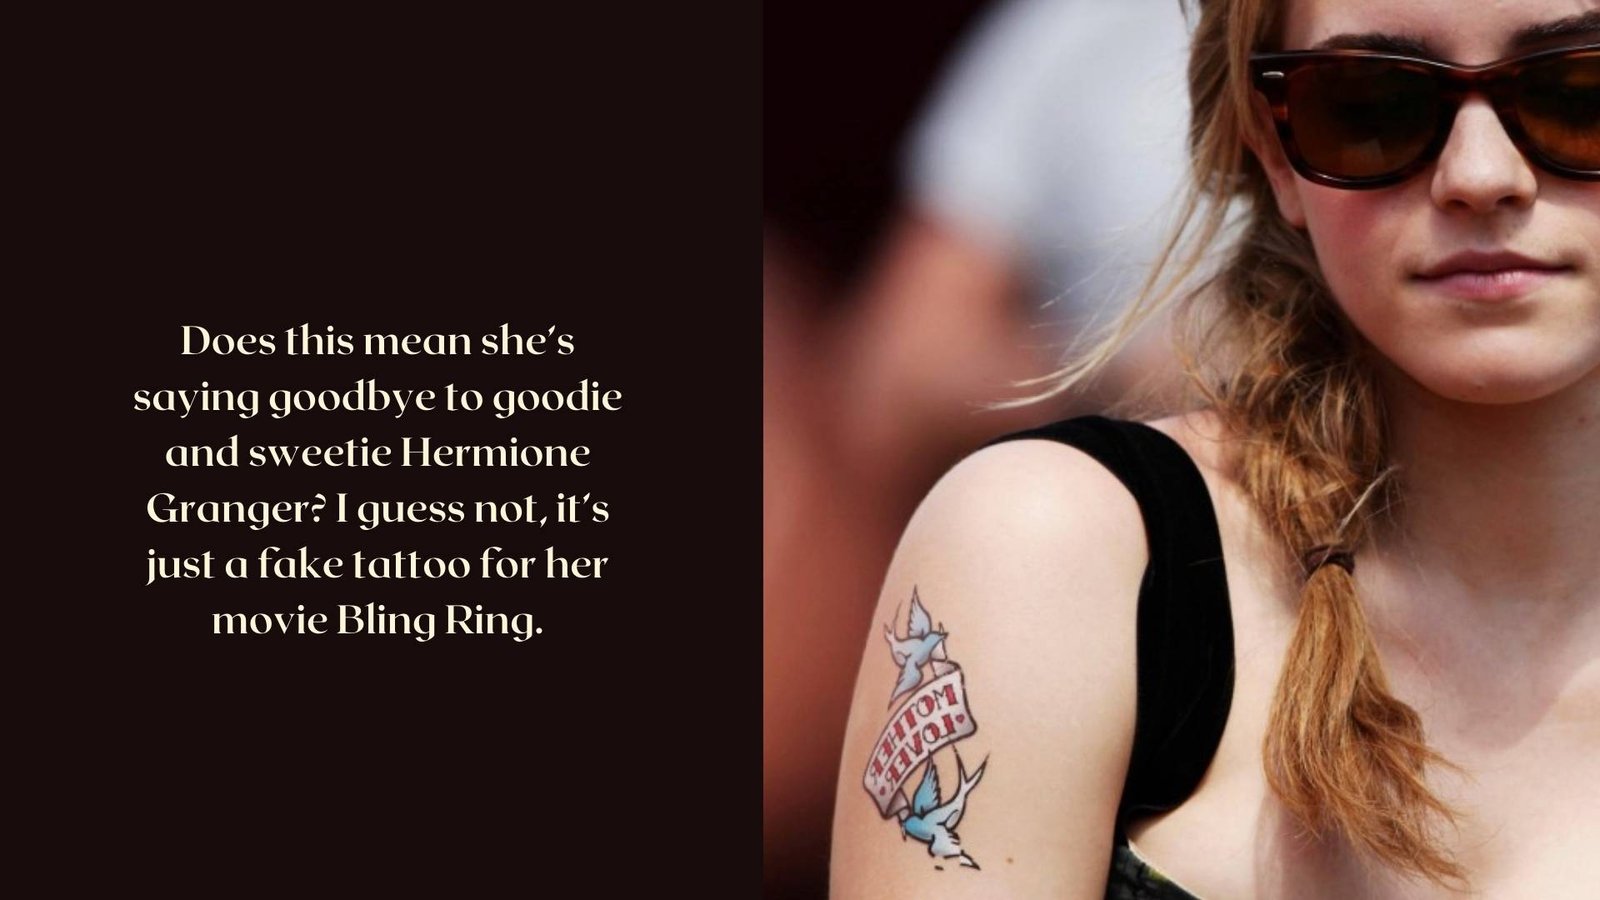 Emma Watson’s Tattoos & Their Meanings